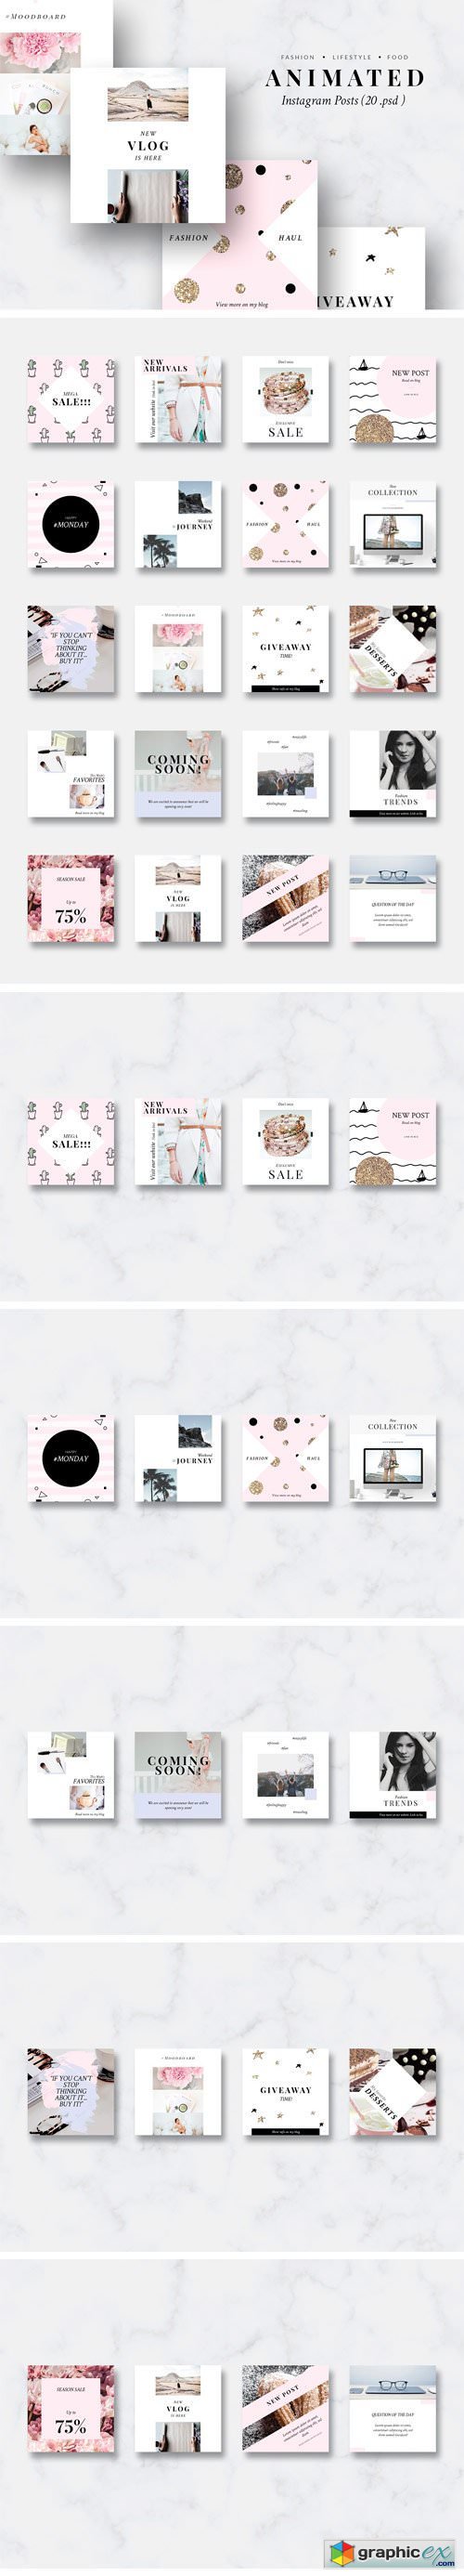 ANIMATED Instagram Posts-Pink & Gold